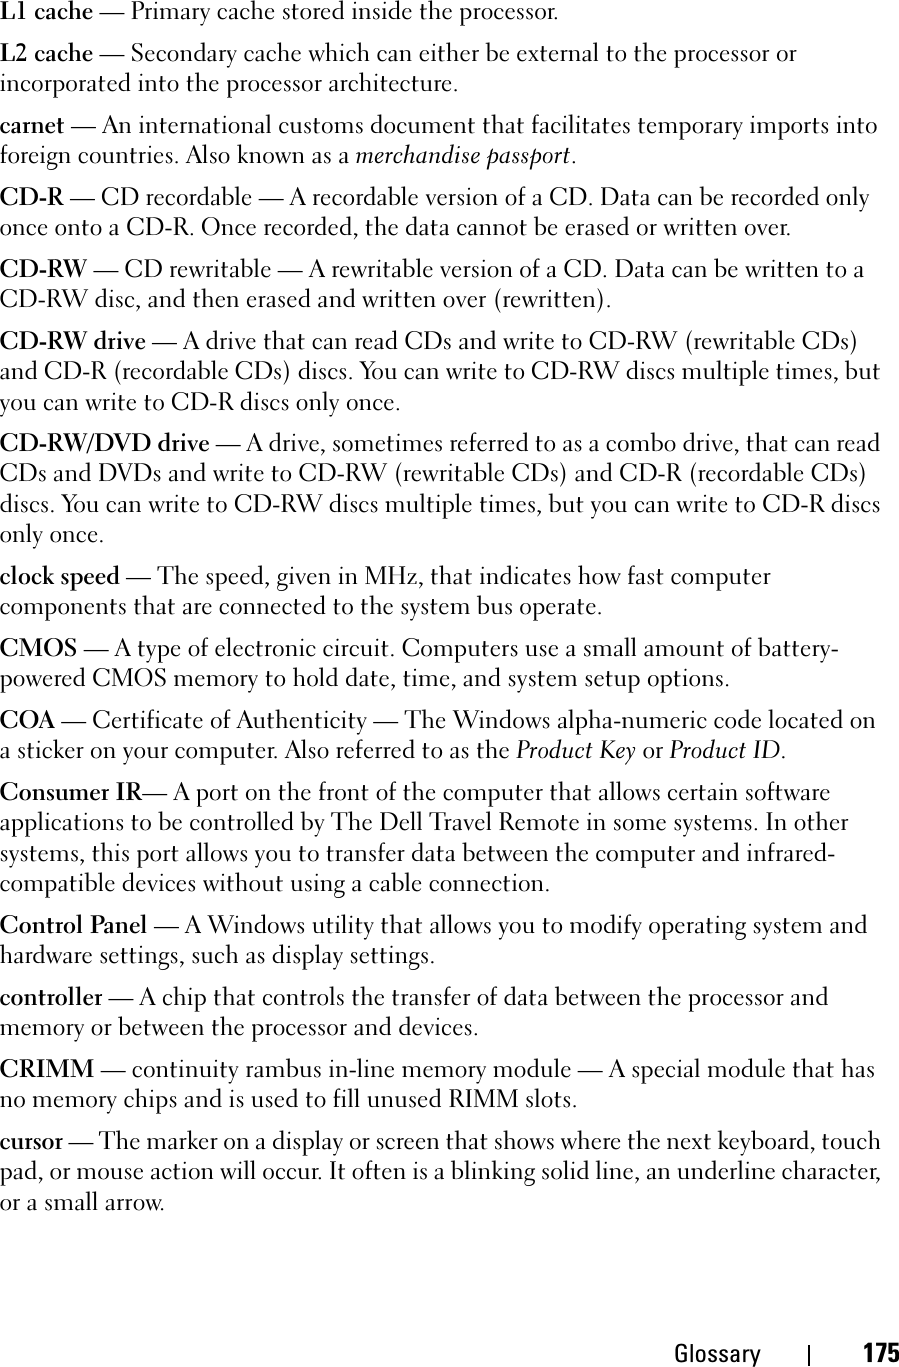 Glossary 175L1 cache — Primary cache stored inside the processor.L2 cache — Secondary cache which can either be external to the processor or incorporated into the processor architecture.carnet — An international customs document that facilitates temporary imports into foreign countries. Also known as a merchandise passport.CD-R — CD recordable — A recordable version of a CD. Data can be recorded only once onto a CD-R. Once recorded, the data cannot be erased or written over.CD-RW — CD rewritable — A rewritable version of a CD. Data can be written to a CD-RW disc, and then erased and written over (rewritten).CD-RW drive — A drive that can read CDs and write to CD-RW (rewritable CDs) and CD-R (recordable CDs) discs. You can write to CD-RW discs multiple times, but you can write to CD-R discs only once.CD-RW/DVD drive — A drive, sometimes referred to as a combo drive, that can read CDs and DVDs and write to CD-RW (rewritable CDs) and CD-R (recordable CDs) discs. You can write to CD-RW discs multiple times, but you can write to CD-R discs only once.clock speed — The speed, given in MHz, that indicates how fast computer components that are connected to the system bus operate. CMOS — A type of electronic circuit. Computers use a small amount of battery-powered CMOS memory to hold date, time, and system setup options. COA — Certificate of Authenticity — The Windows alpha-numeric code located on a sticker on your computer. Also referred to as the Product Key or Product ID.Consumer IR— A port on the front of the computer that allows certain software applications to be controlled by The Dell Travel Remote in some systems. In other systems, this port allows you to transfer data between the computer and infrared-compatible devices without using a cable connection.Control Panel — A Windows utility that allows you to modify operating system and hardware settings, such as display settings.controller — A chip that controls the transfer of data between the processor and memory or between the processor and devices.CRIMM — continuity rambus in-line memory module — A special module that has no memory chips and is used to fill unused RIMM slots.cursor — The marker on a display or screen that shows where the next keyboard, touch pad, or mouse action will occur. It often is a blinking solid line, an underline character, or a small arrow.